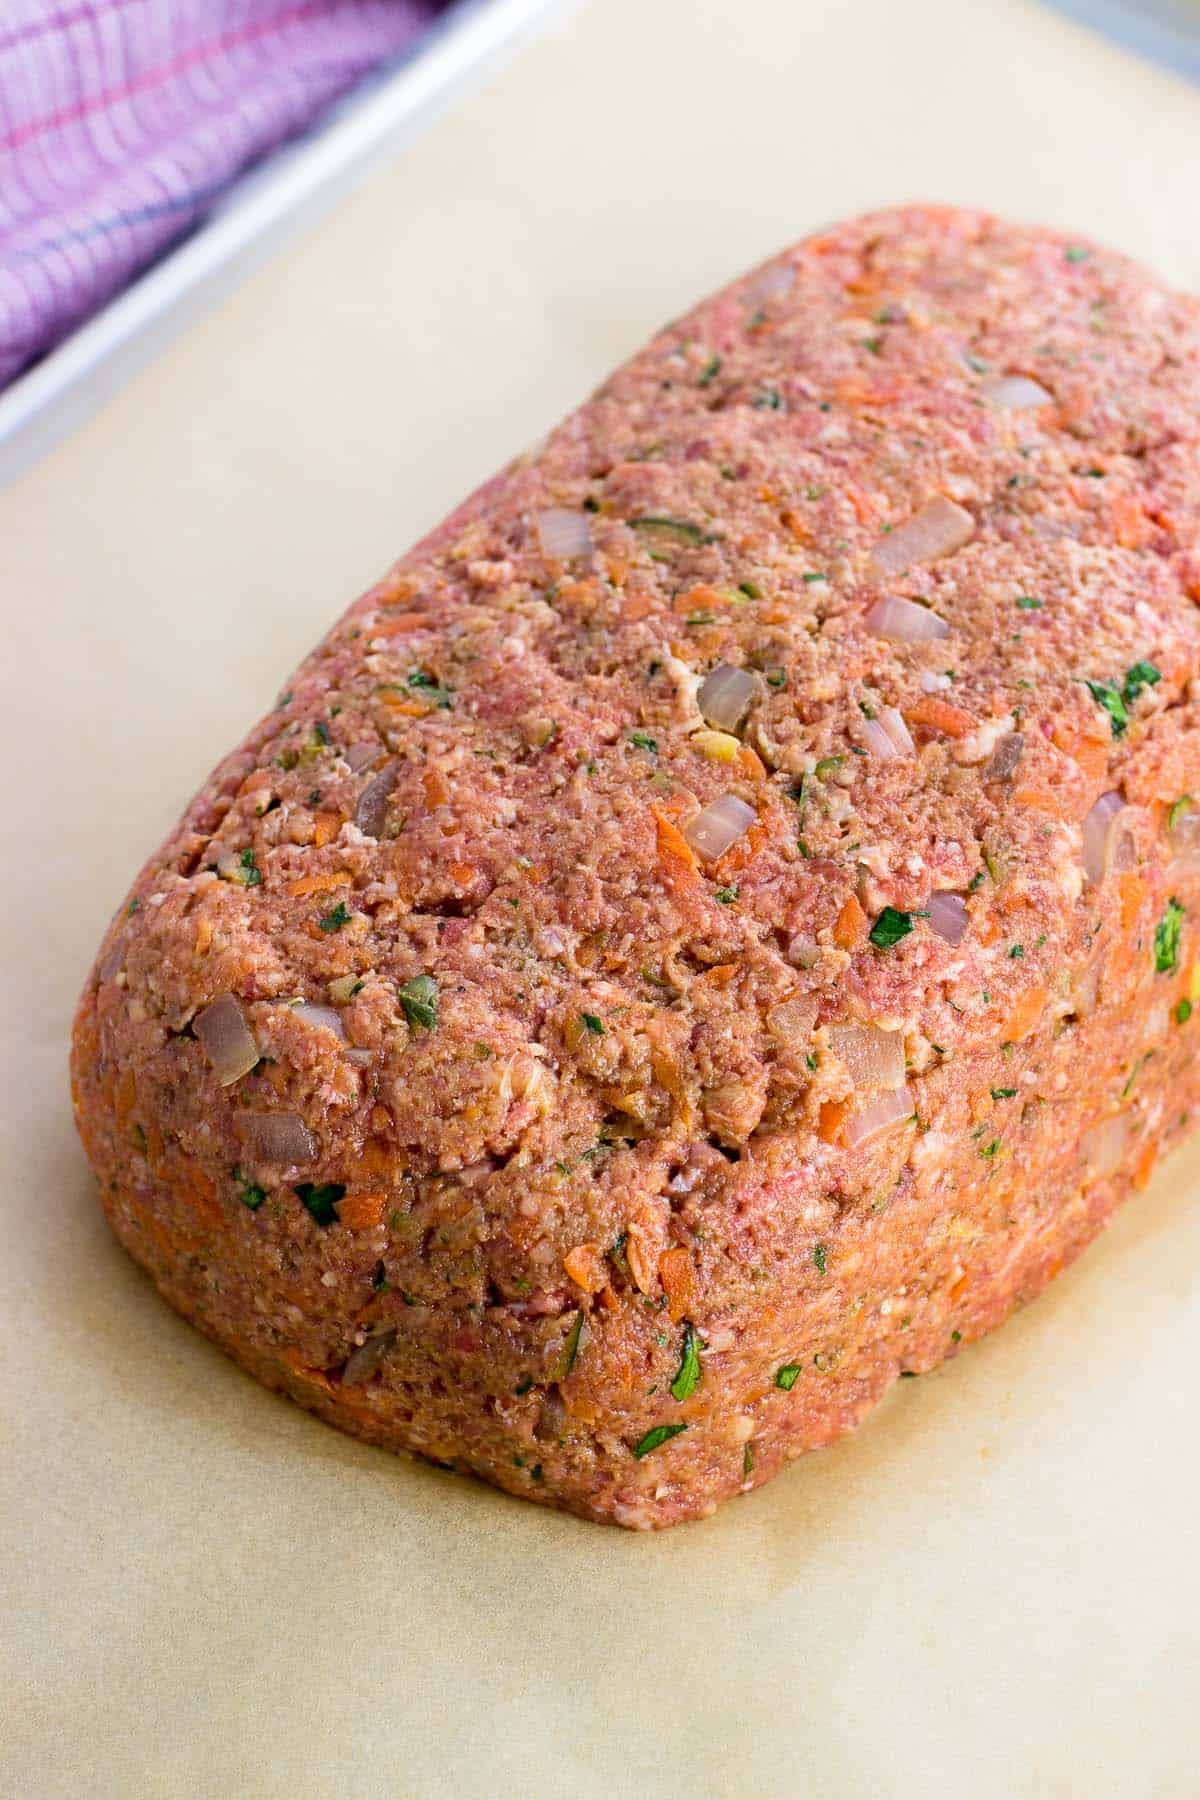 A shaped meatloaf on a parchment-lined sheet pan.